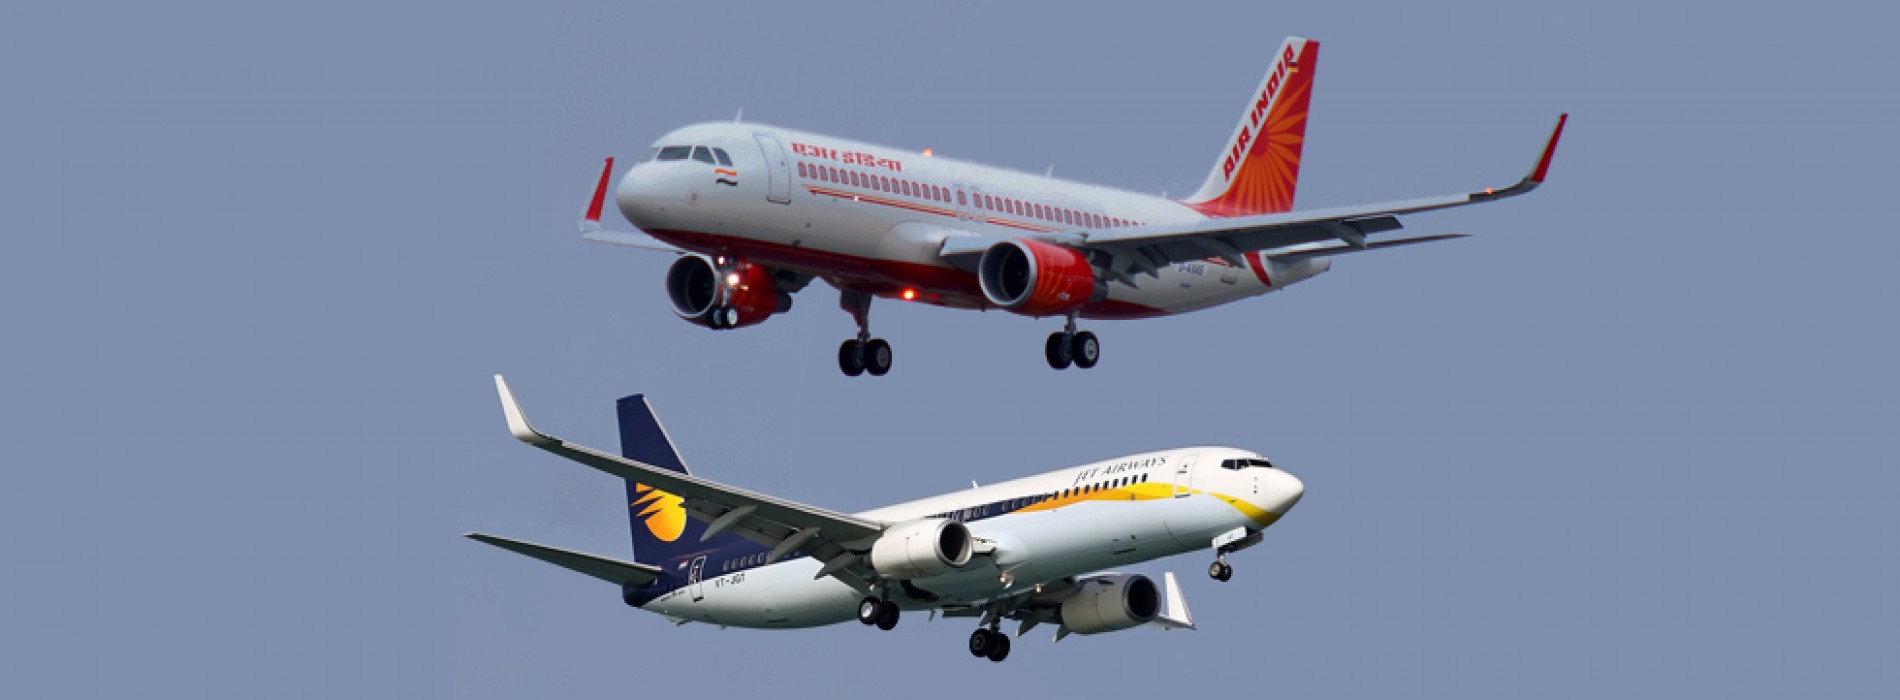 New flights and routes: Air India, Jet Airways see gains in US travel curbs